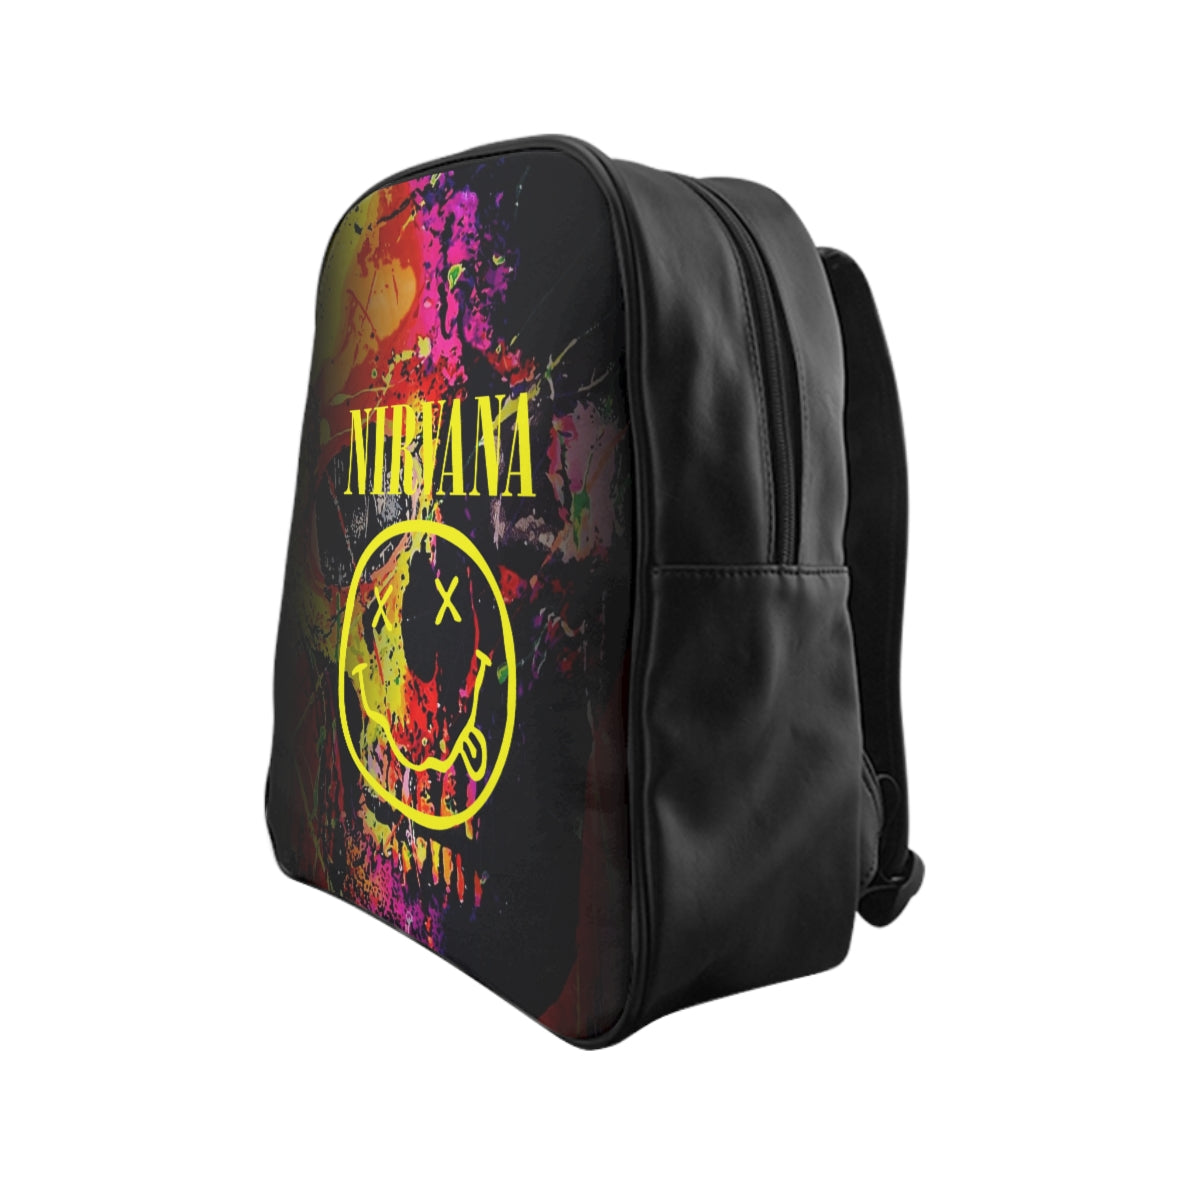 Getrott Nirvana Graffiti Backpack Padded Syntetic Leather Carry-On Travel Check Luggage 4-Wheel Spinner Suitcase Bag Multiple Colors and Sizes